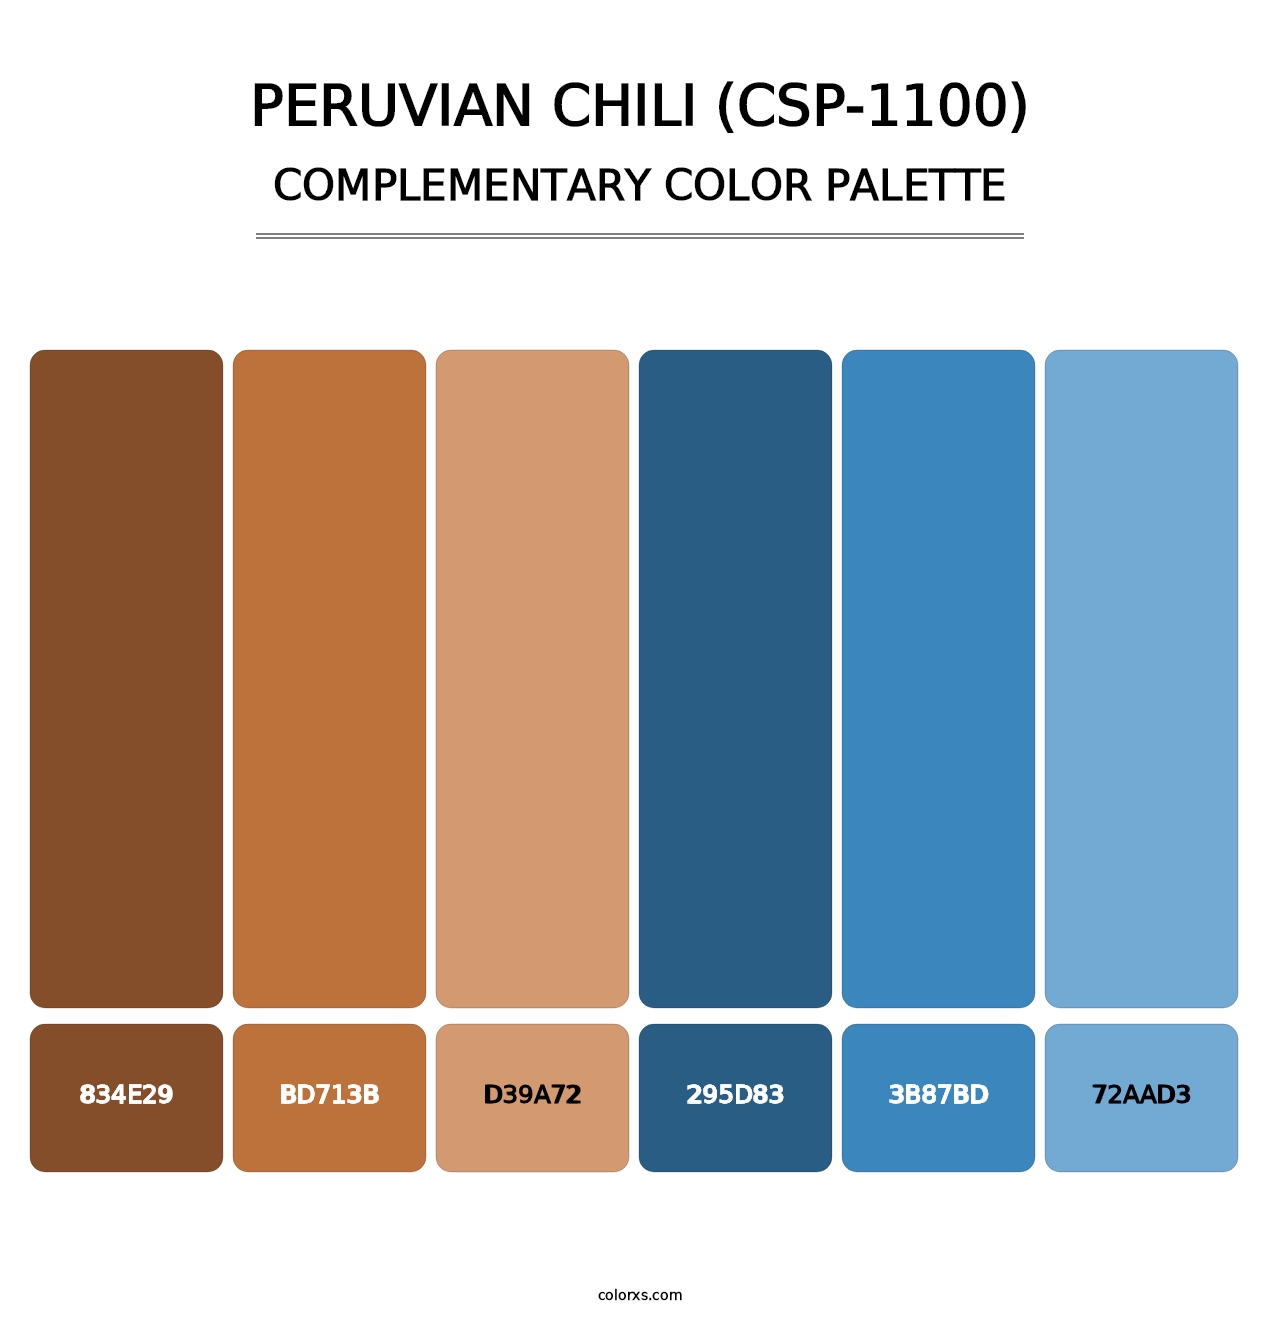 Peruvian Chili (CSP-1100) - Complementary Color Palette